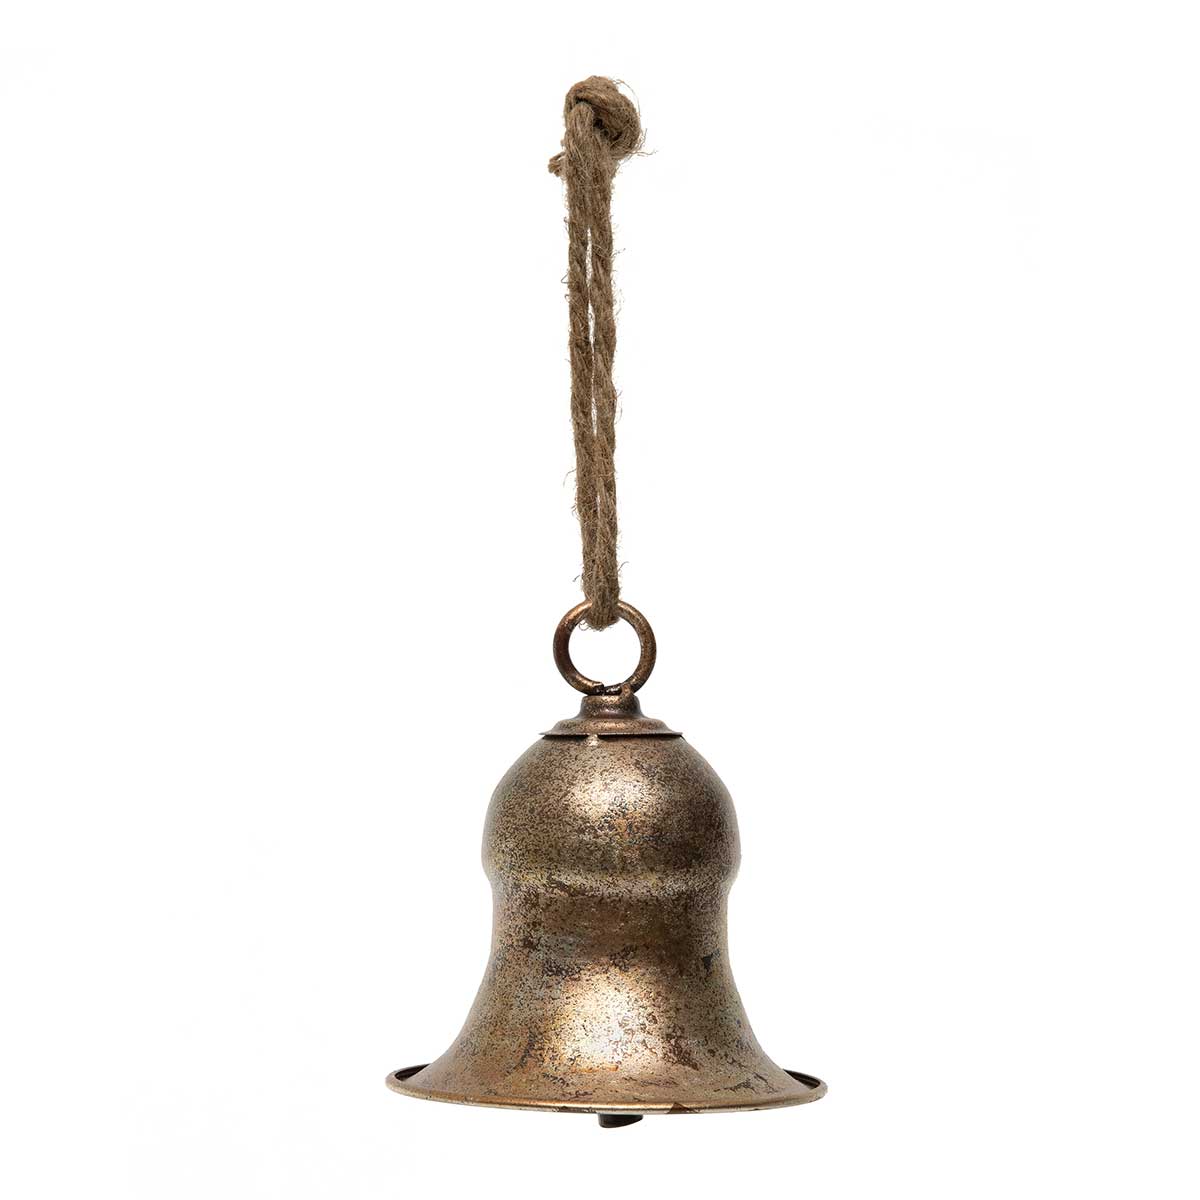 BELL ANTIQUE CAROLING COPPER 5.25IN X 5.5IN WITH ROPE HANGER